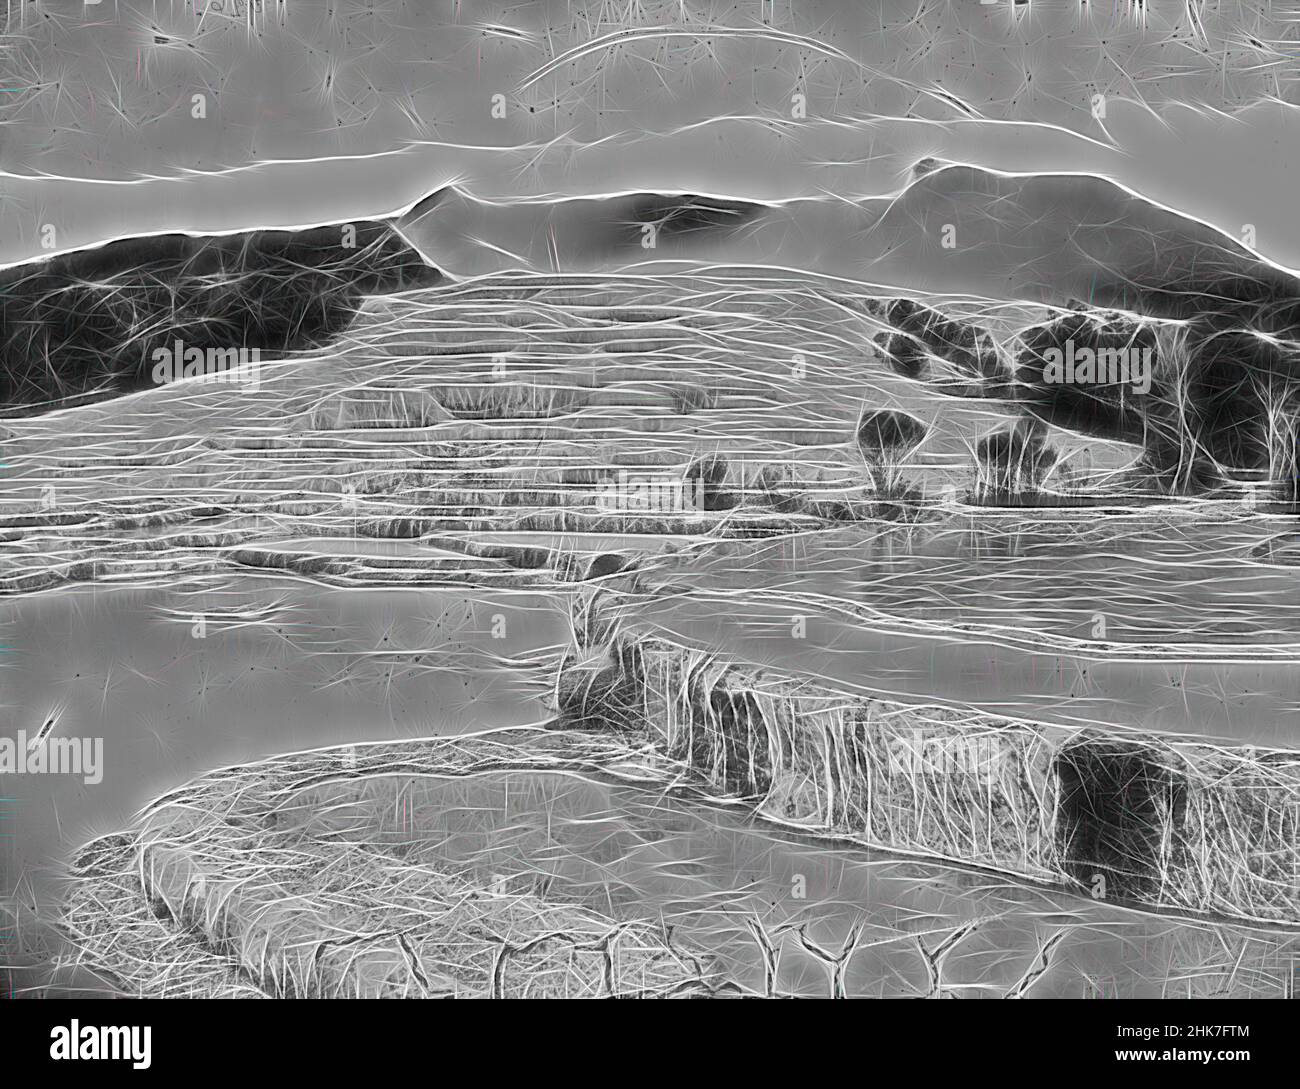 Inspired by White Terrace, Burton Brothers studio, photography studio, circa 1885, Dunedin, wet collodion process, View of the white terraces at Rotomahana. There is steam rising from the top of the terrace, Reimagined by Artotop. Classic art reinvented with a modern twist. Design of warm cheerful glowing of brightness and light ray radiance. Photography inspired by surrealism and futurism, embracing dynamic energy of modern technology, movement, speed and revolutionize culture Stock Photo